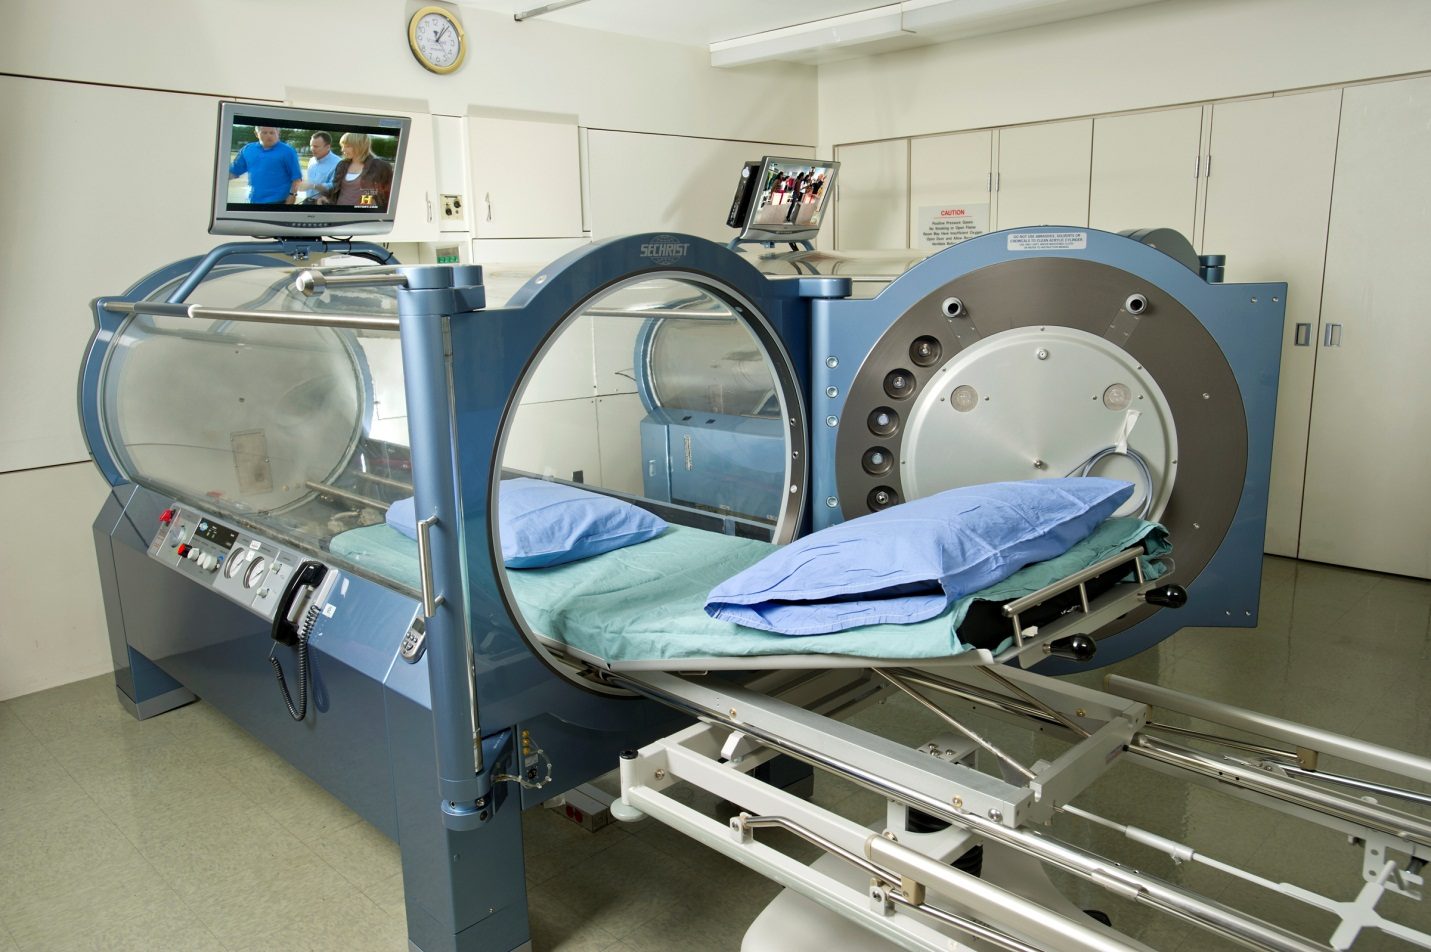 Hyperbaric chamber for sale: Everything you need to know about oxygen chambers